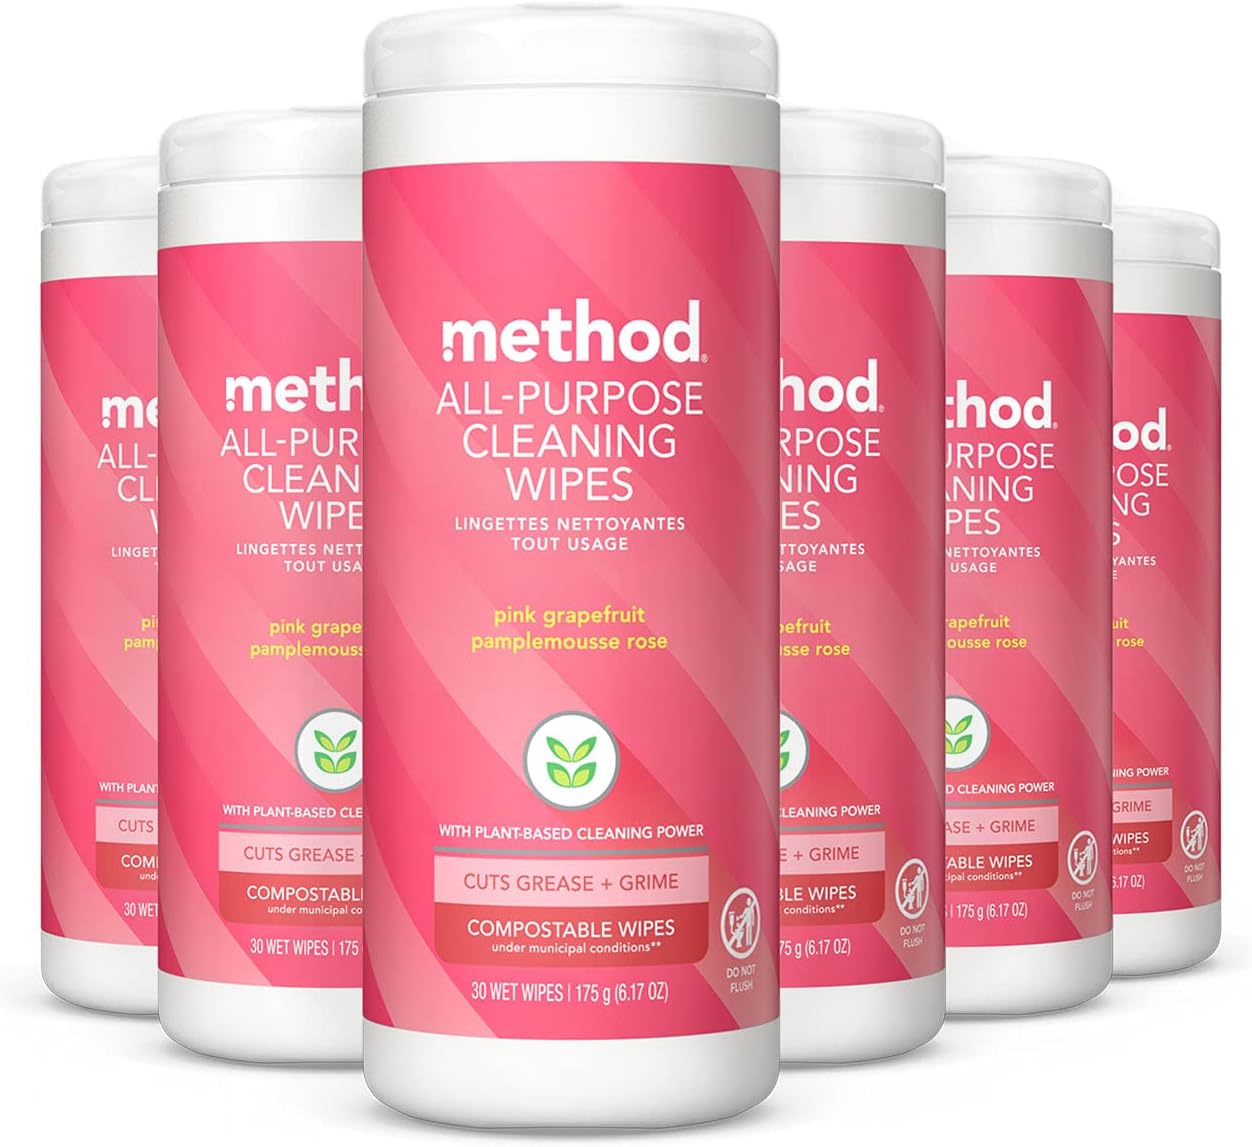 Method All-Purpose Cleaning Wipes, Pink Grapefruit, Multi-Surface, Compostable, 30 Count (Pack of 6)